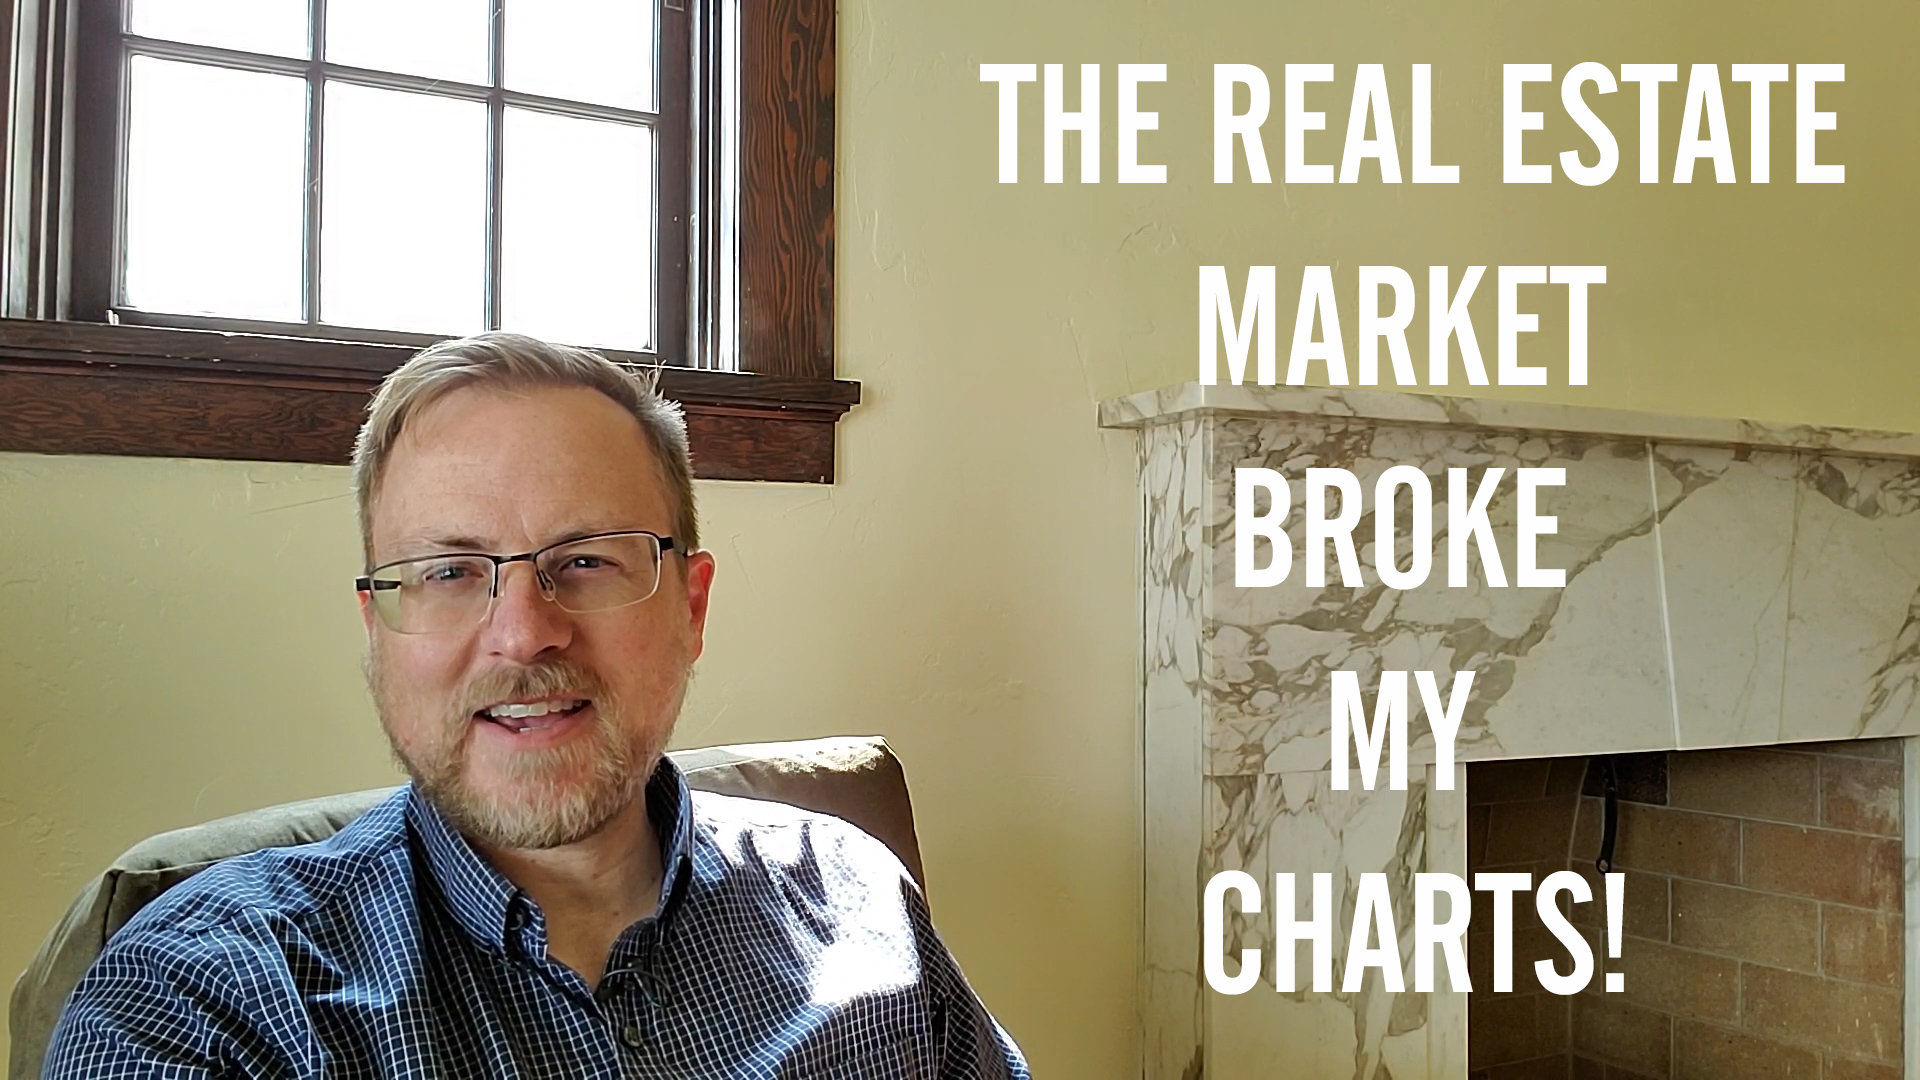 VIDEO: Northern Utah Real Estate Market Update – March 2021 – The Market Broke My Charts!